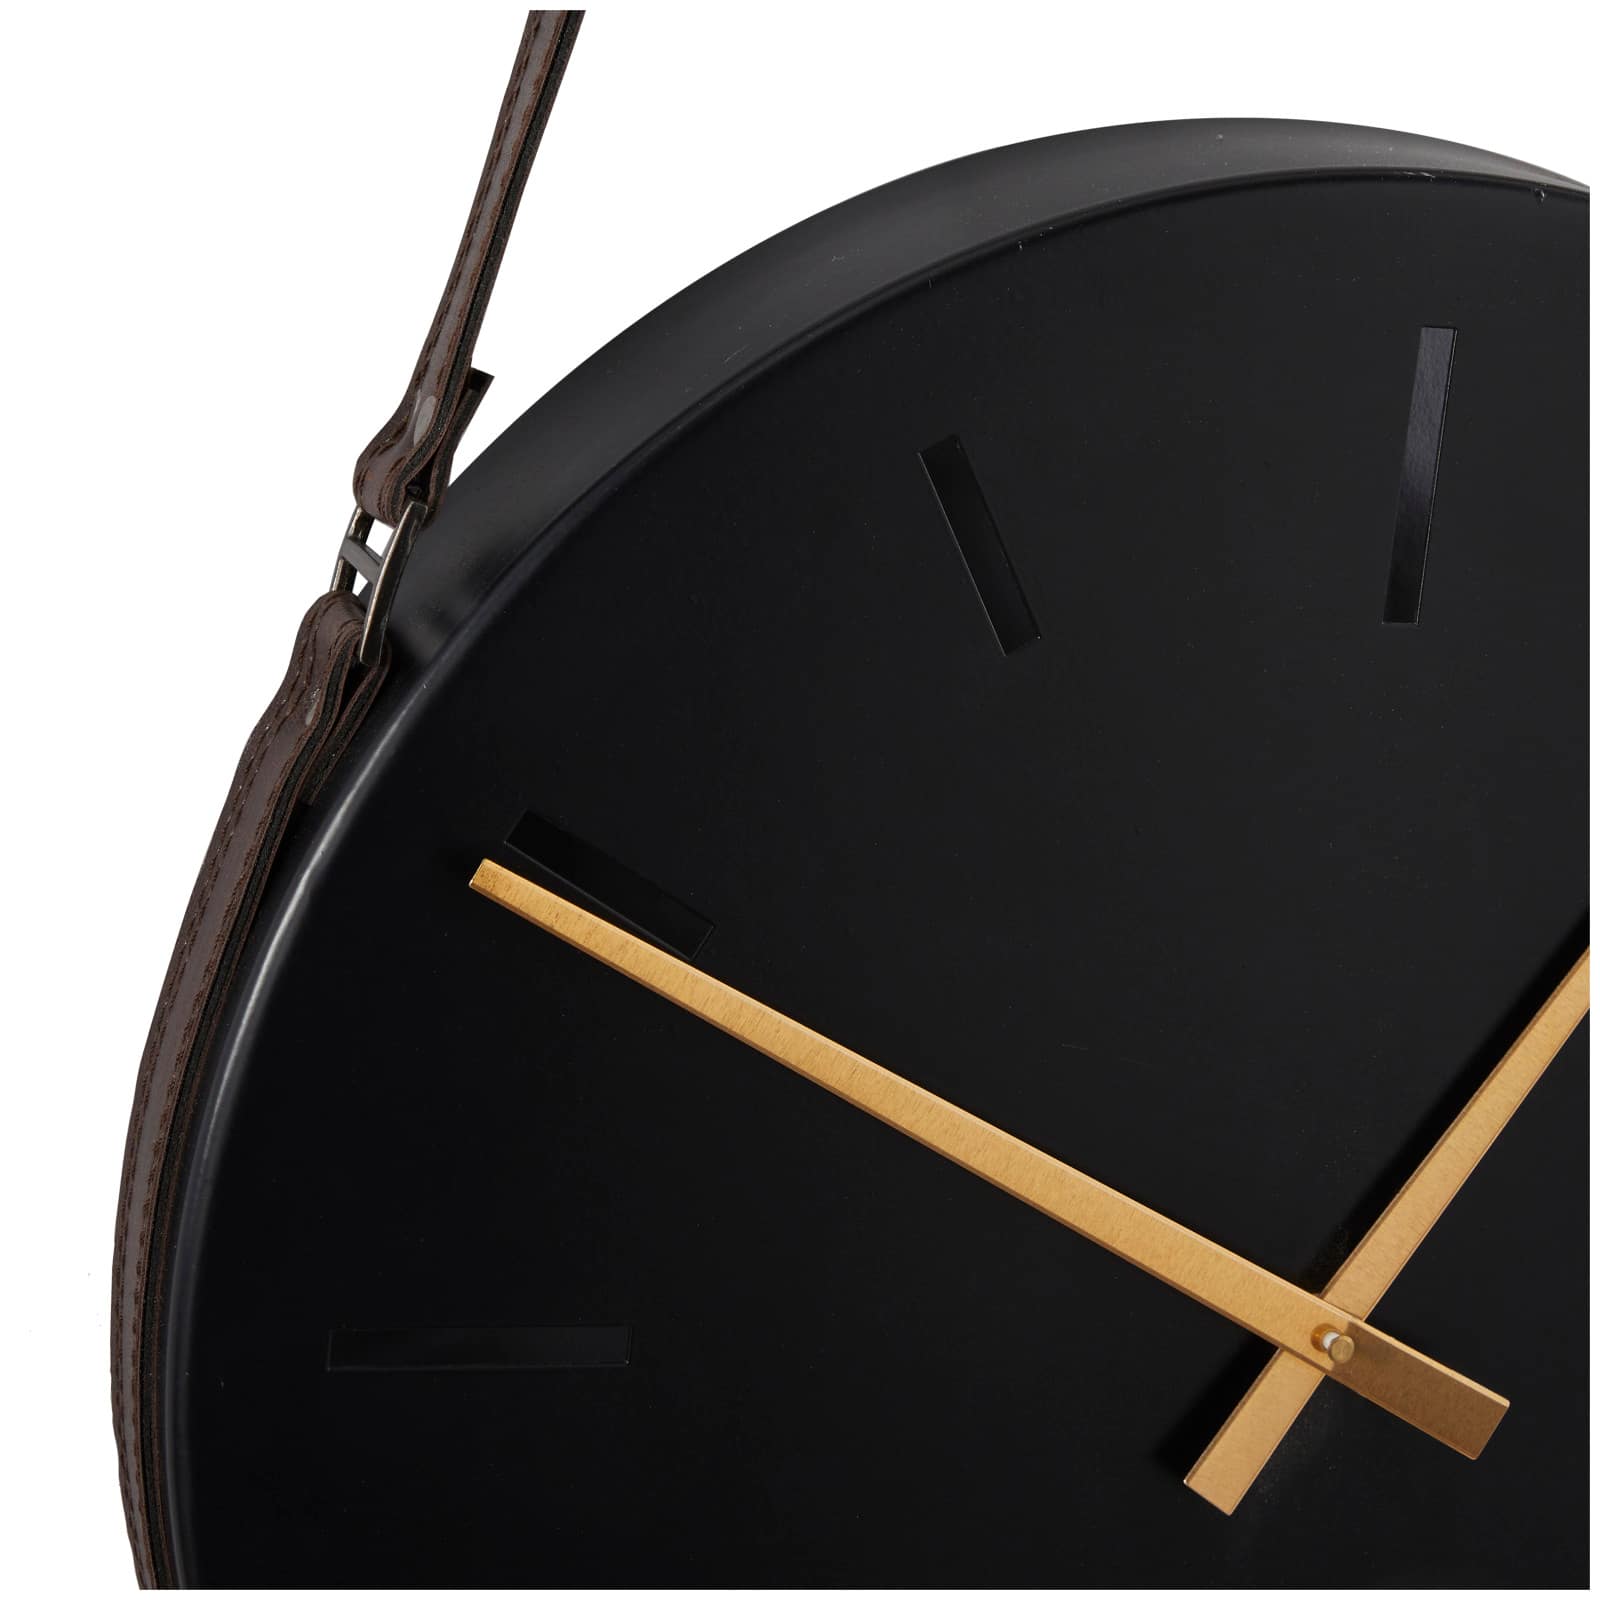 27&#x22; Black Stainless Steel Wall Clock with Leather Hanging Straps